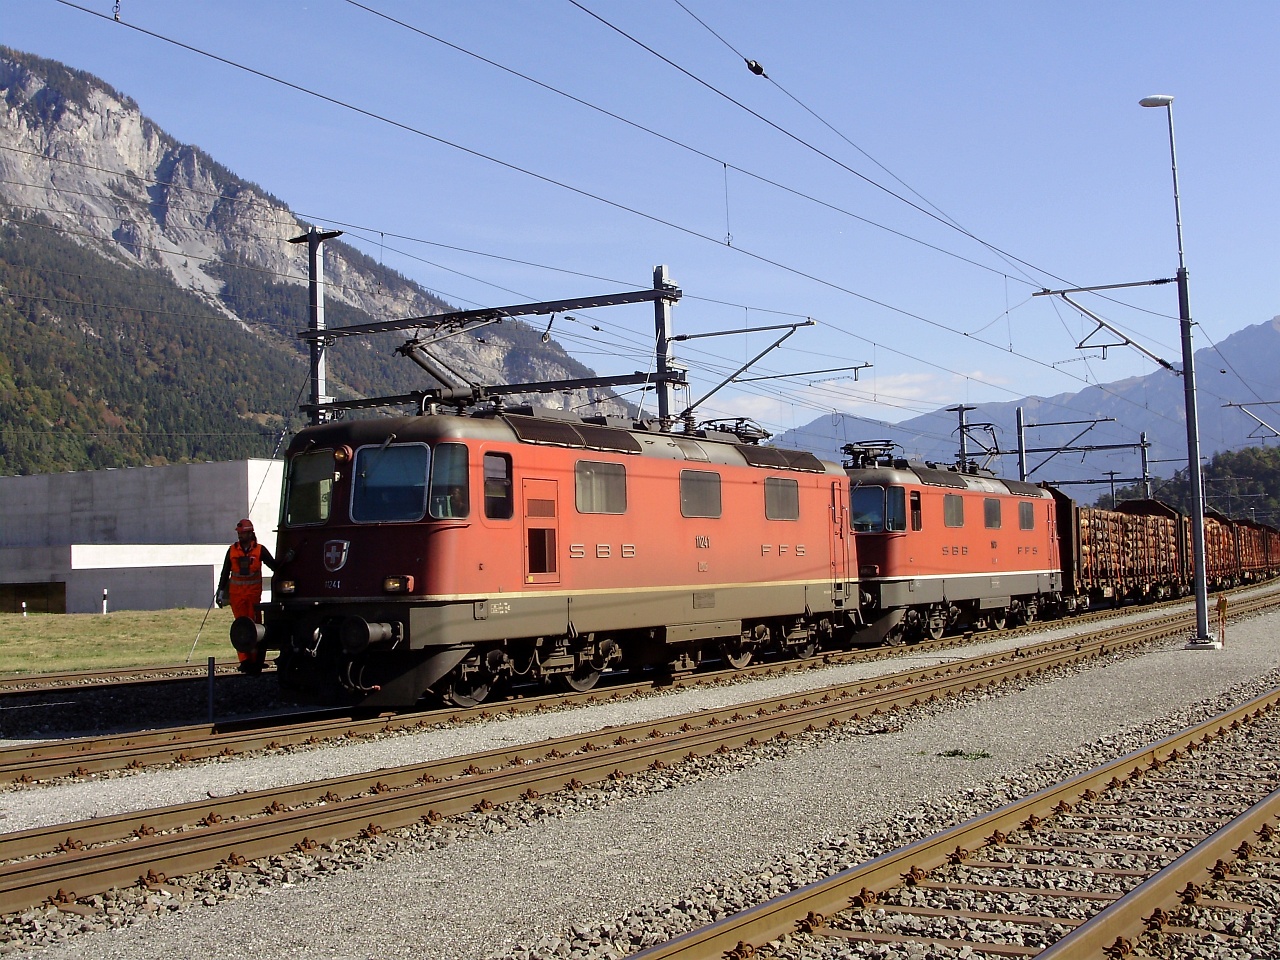 The SBB Re 420 11241 and its sister are hauling a normal-gauge freight train on the track plaite section of the RhB between Domat/Ems and Ems Werk photo